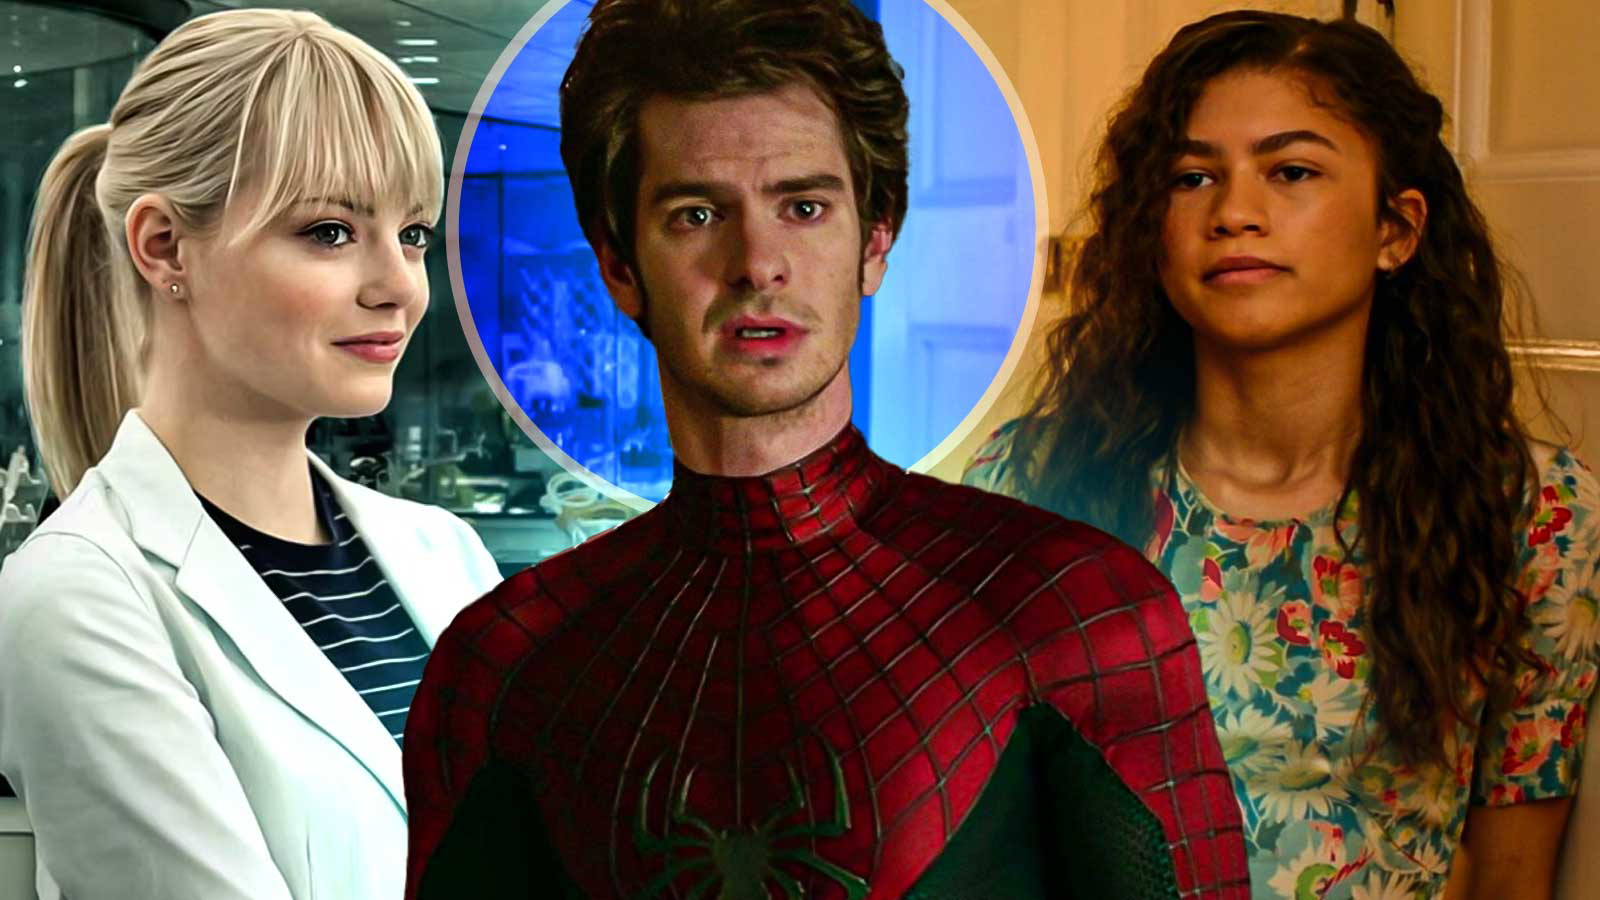 “Andrew Garfield come get your Oscar”: Spider-Man Actor Could Hit the Jackpot With Real-Life Tennis Legend after Emma Stone, Zendaya